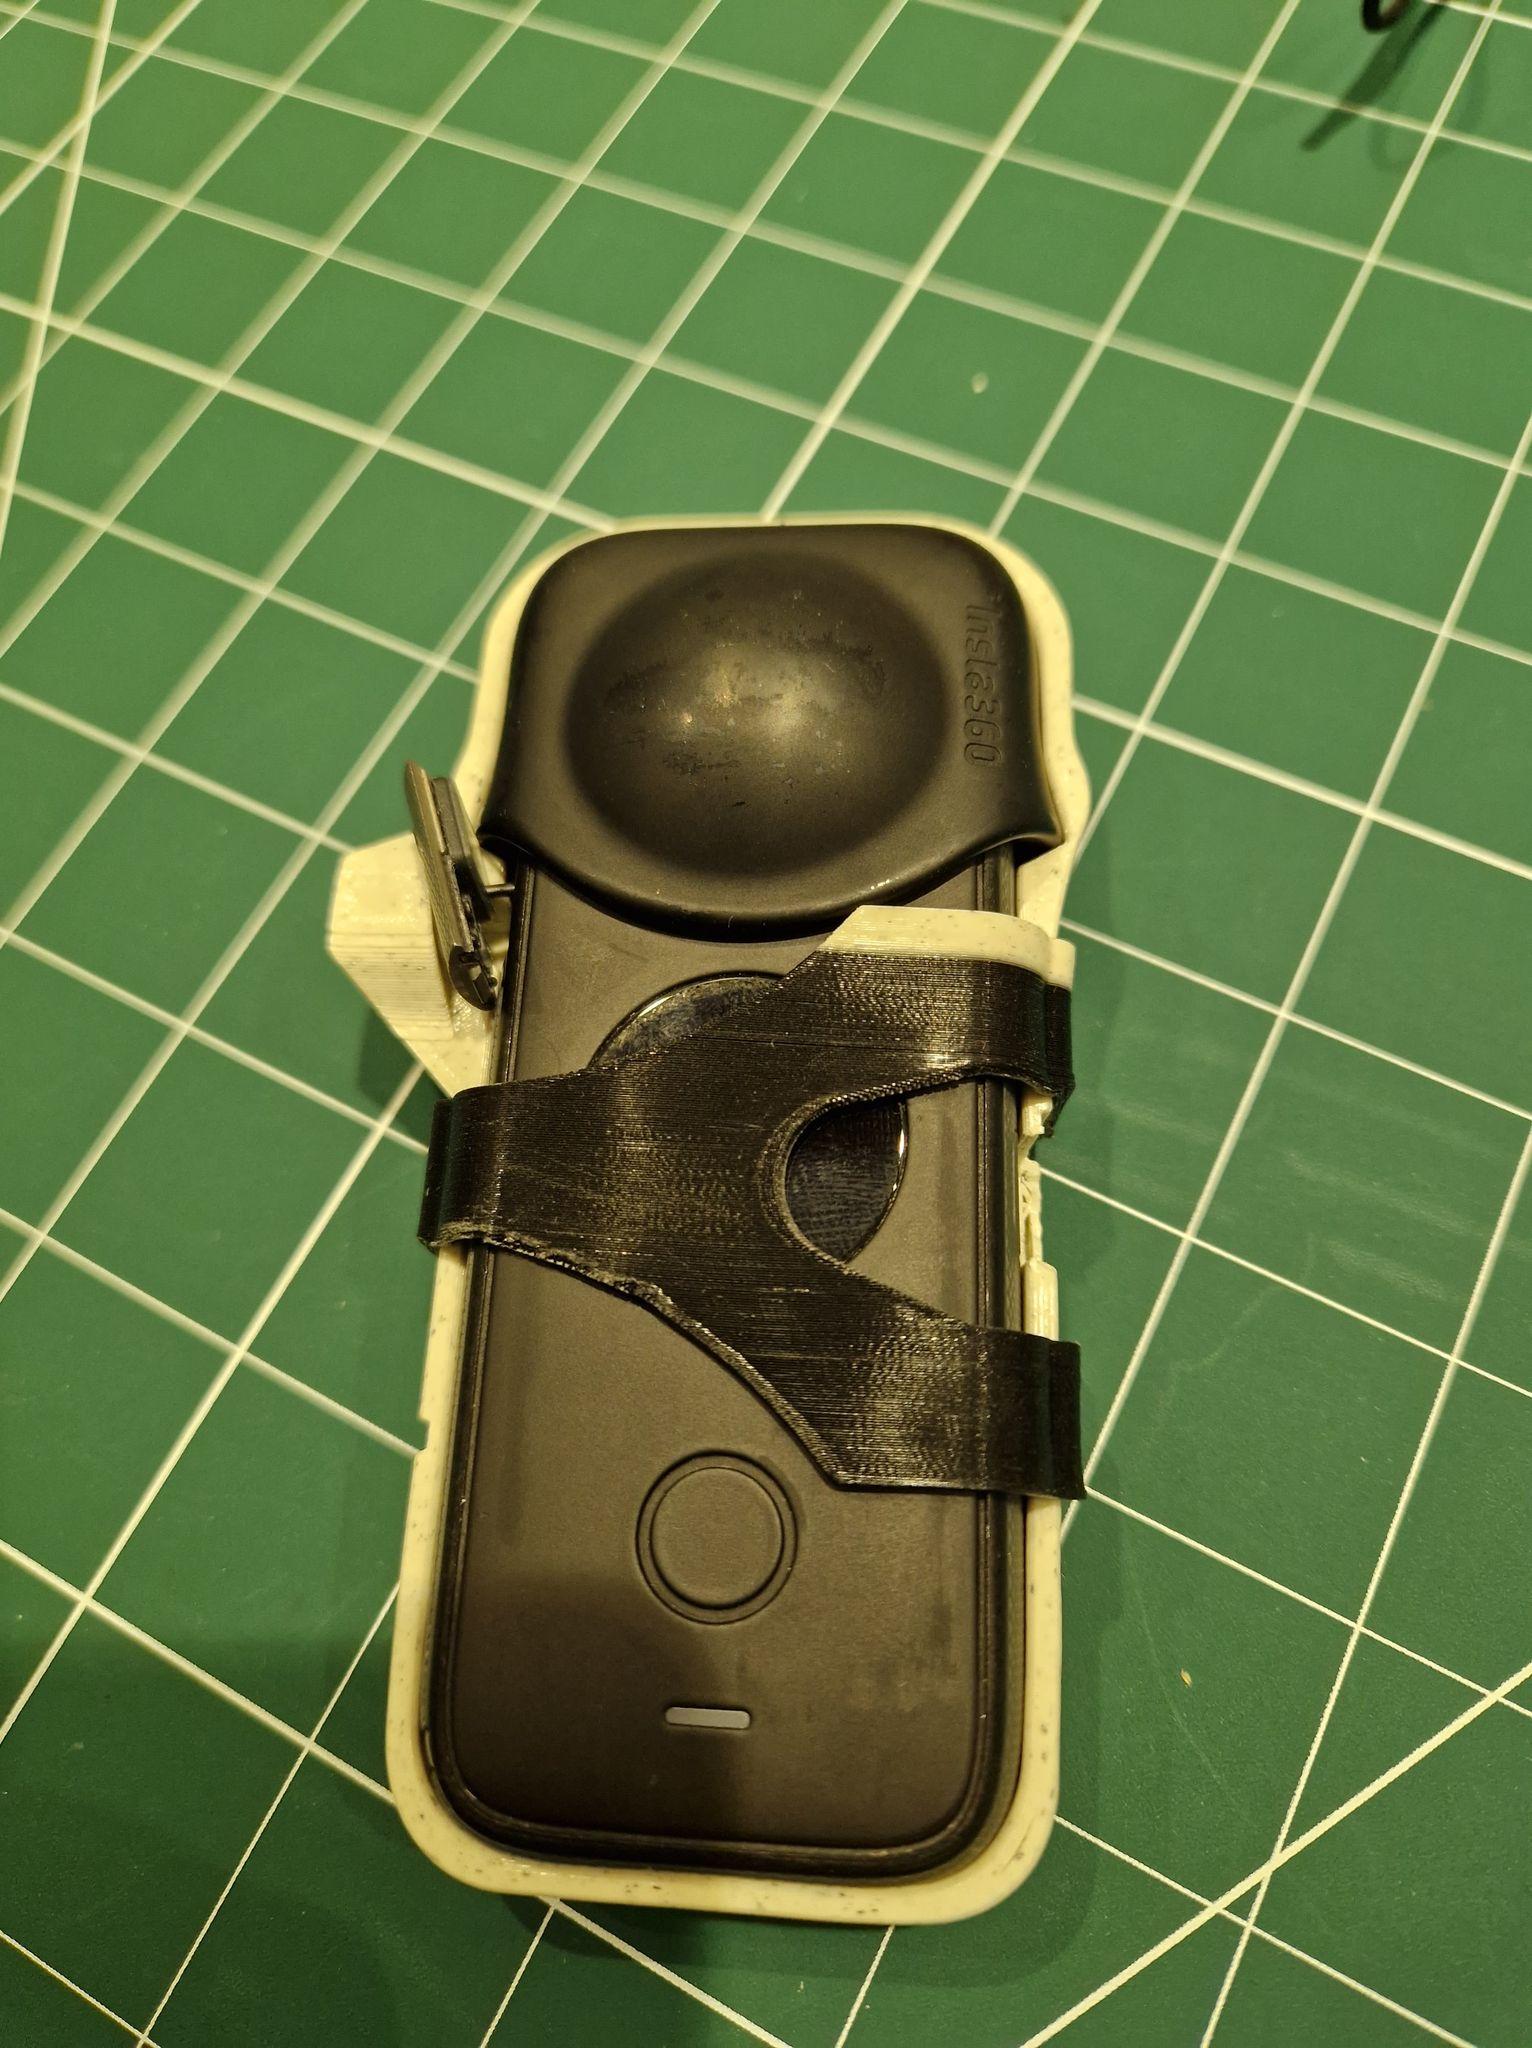 insta 360 one x2 charge guard body.stl 3d model